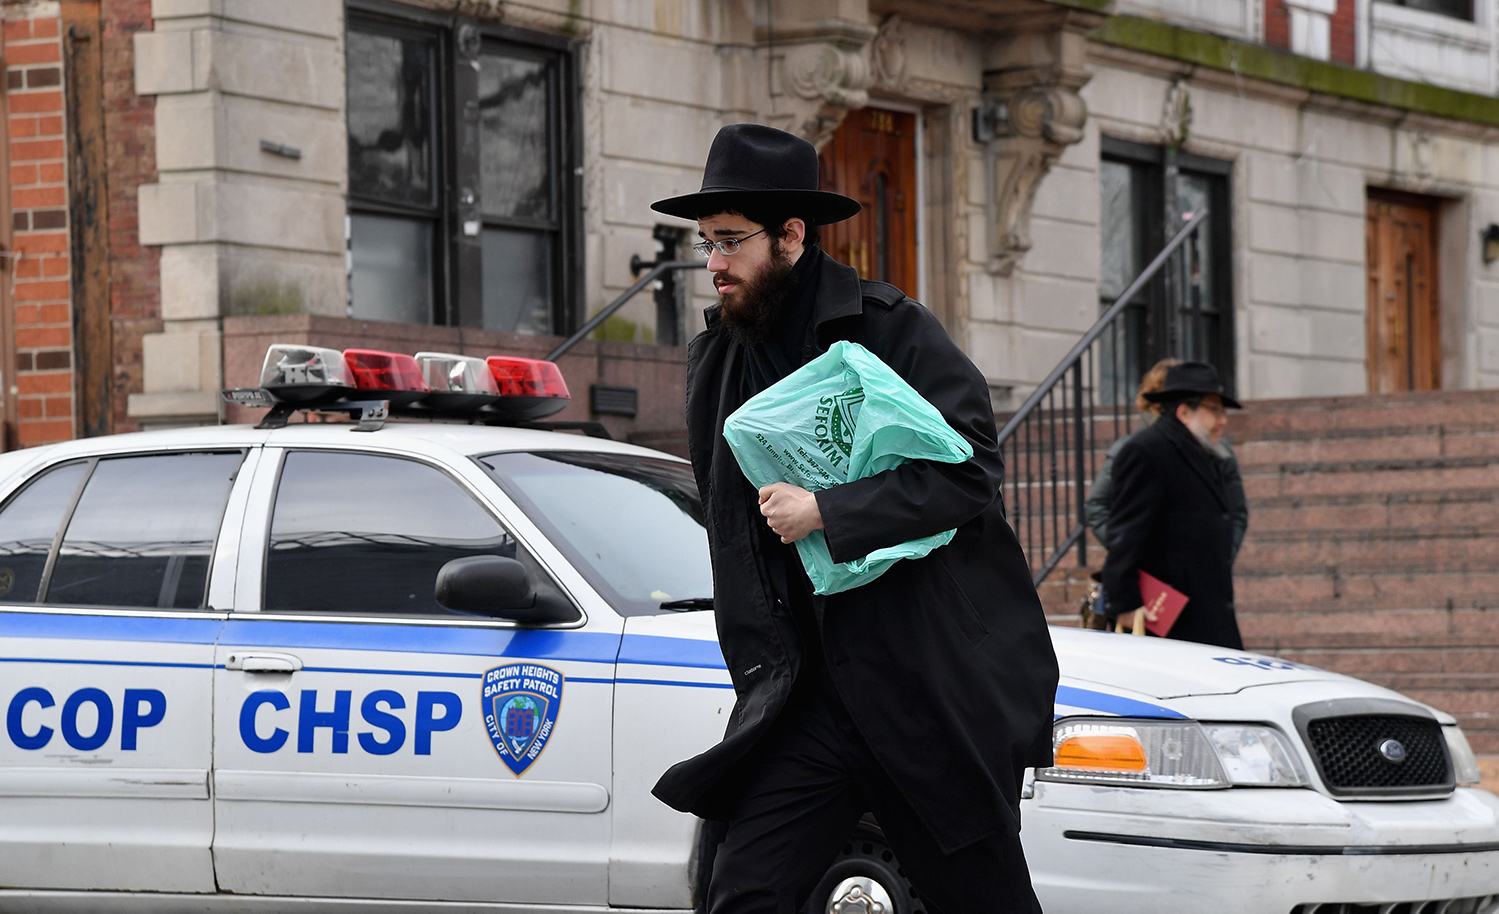 An Orthodox Jew in the Brooklyn neighborhood of Crown Heights on February 27, 2019. ANGELA WEISS/AFP via Getty Images.
